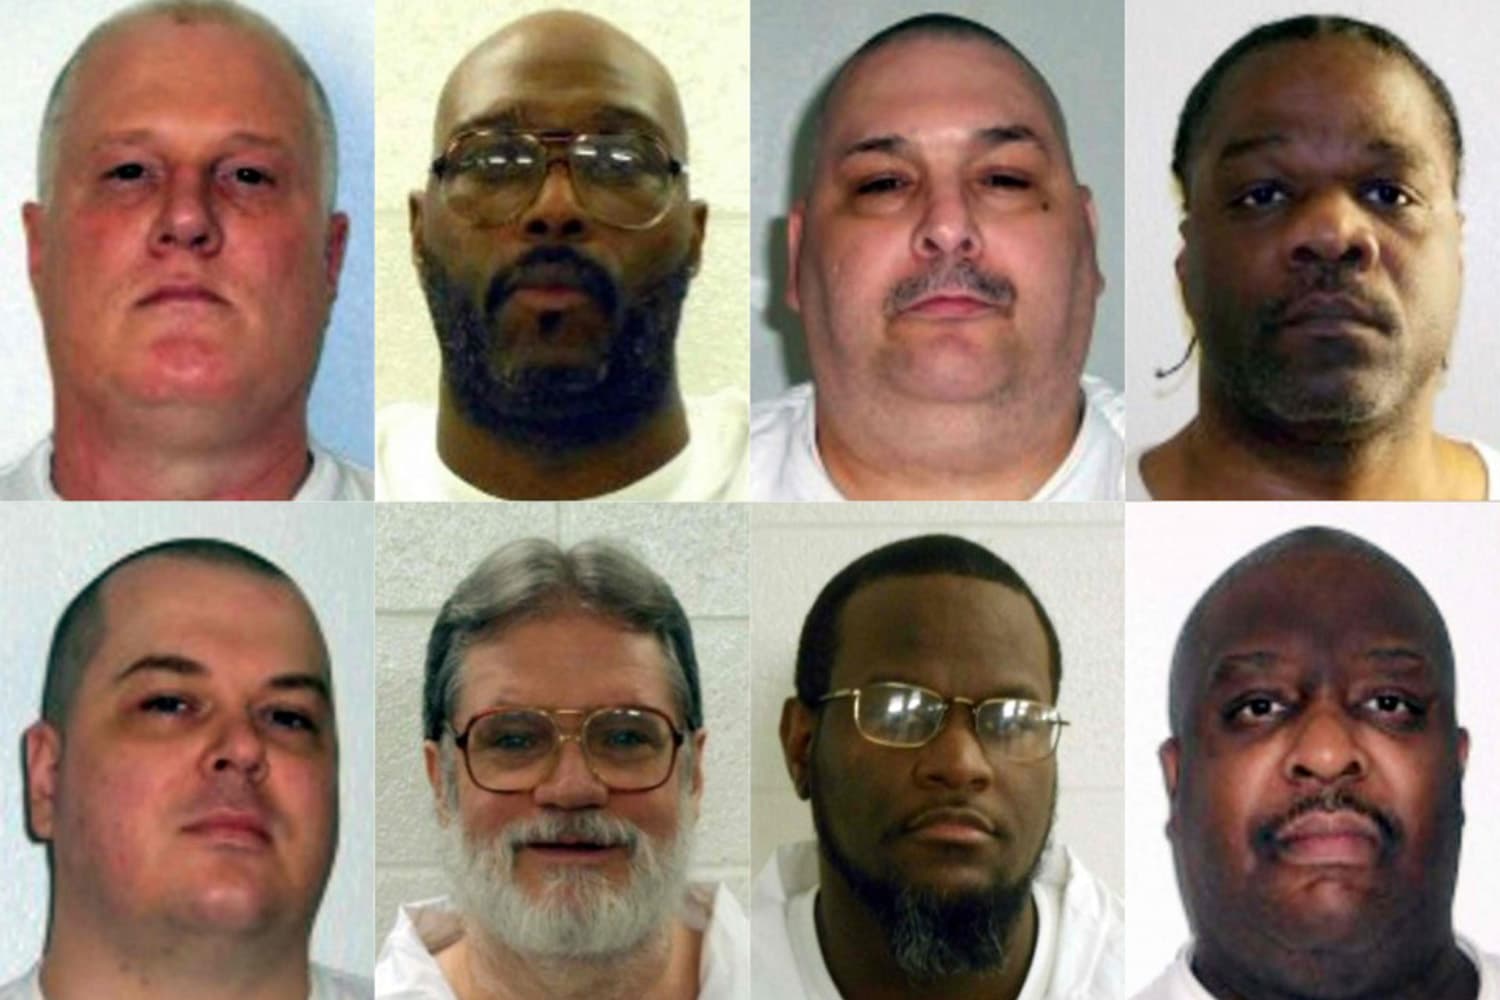 The eight Arkansas death-row inmates scheduled for execution this month. Jason McGehee, bottom row on the left, had his execution stayed by a judge this week. (AFP Photo/Getty Images/Arkansas Department of Correction)